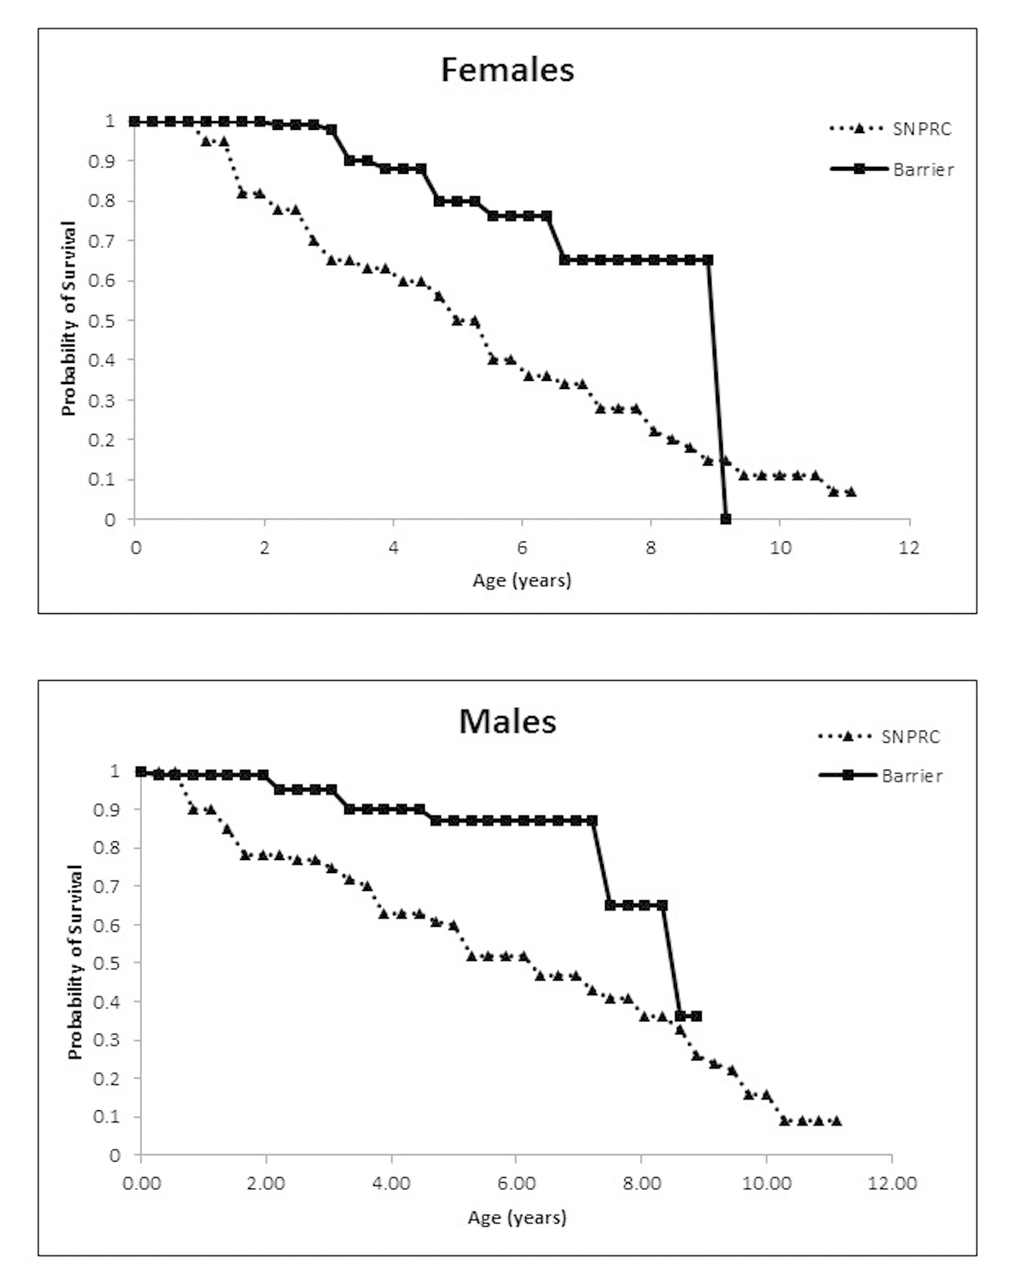 (A) Probability of survival for female marmosets in the Barshop SPF barrier colony and the conventionally housed SNPRC colony. (B) Probability of survival for males.